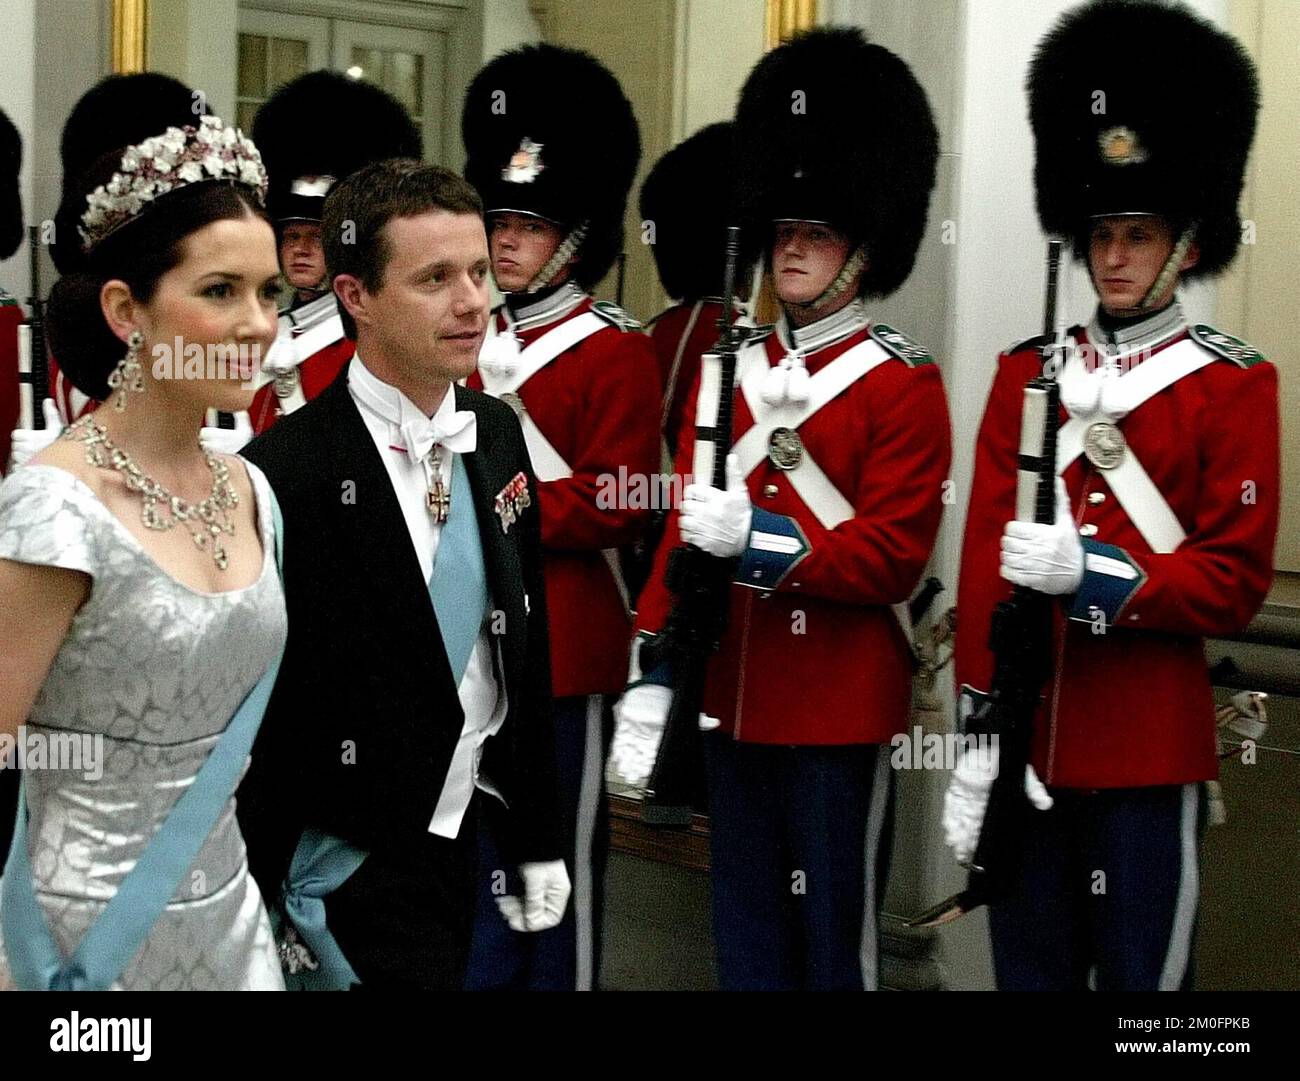 The Crown Prince Frederik of Denmark and Miss Mary Donaldson arrive to the official dinner to celebrate the royal wedding together Denmark's top officials. Stock Photo